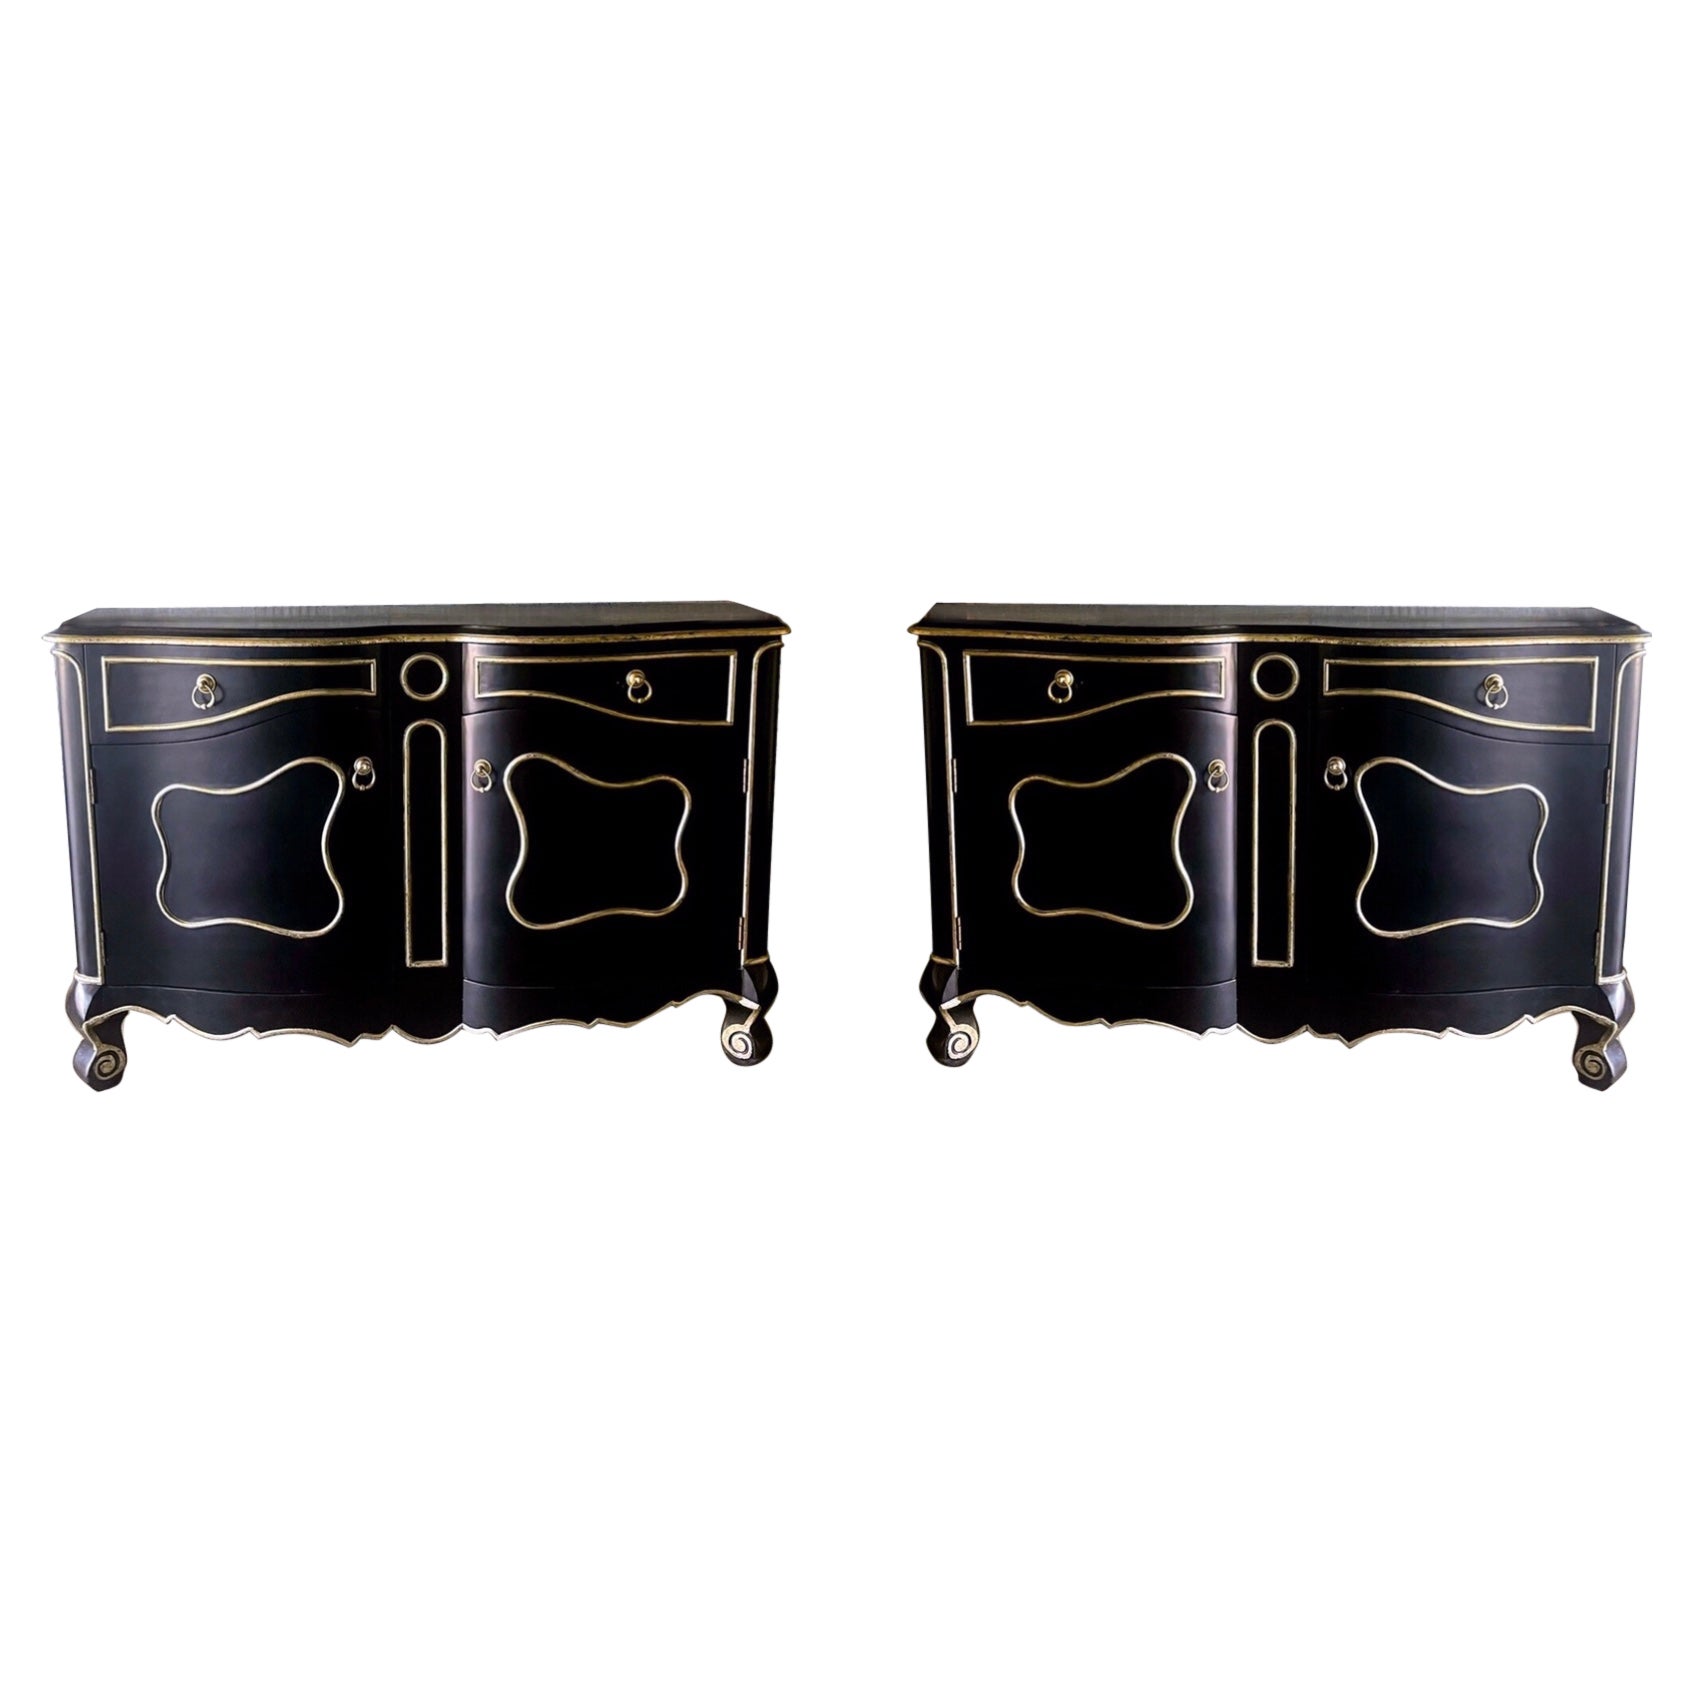 Late 20th-C. Modern French Louis XV Cabinet in Black and Silver Gilt, Pair For Sale